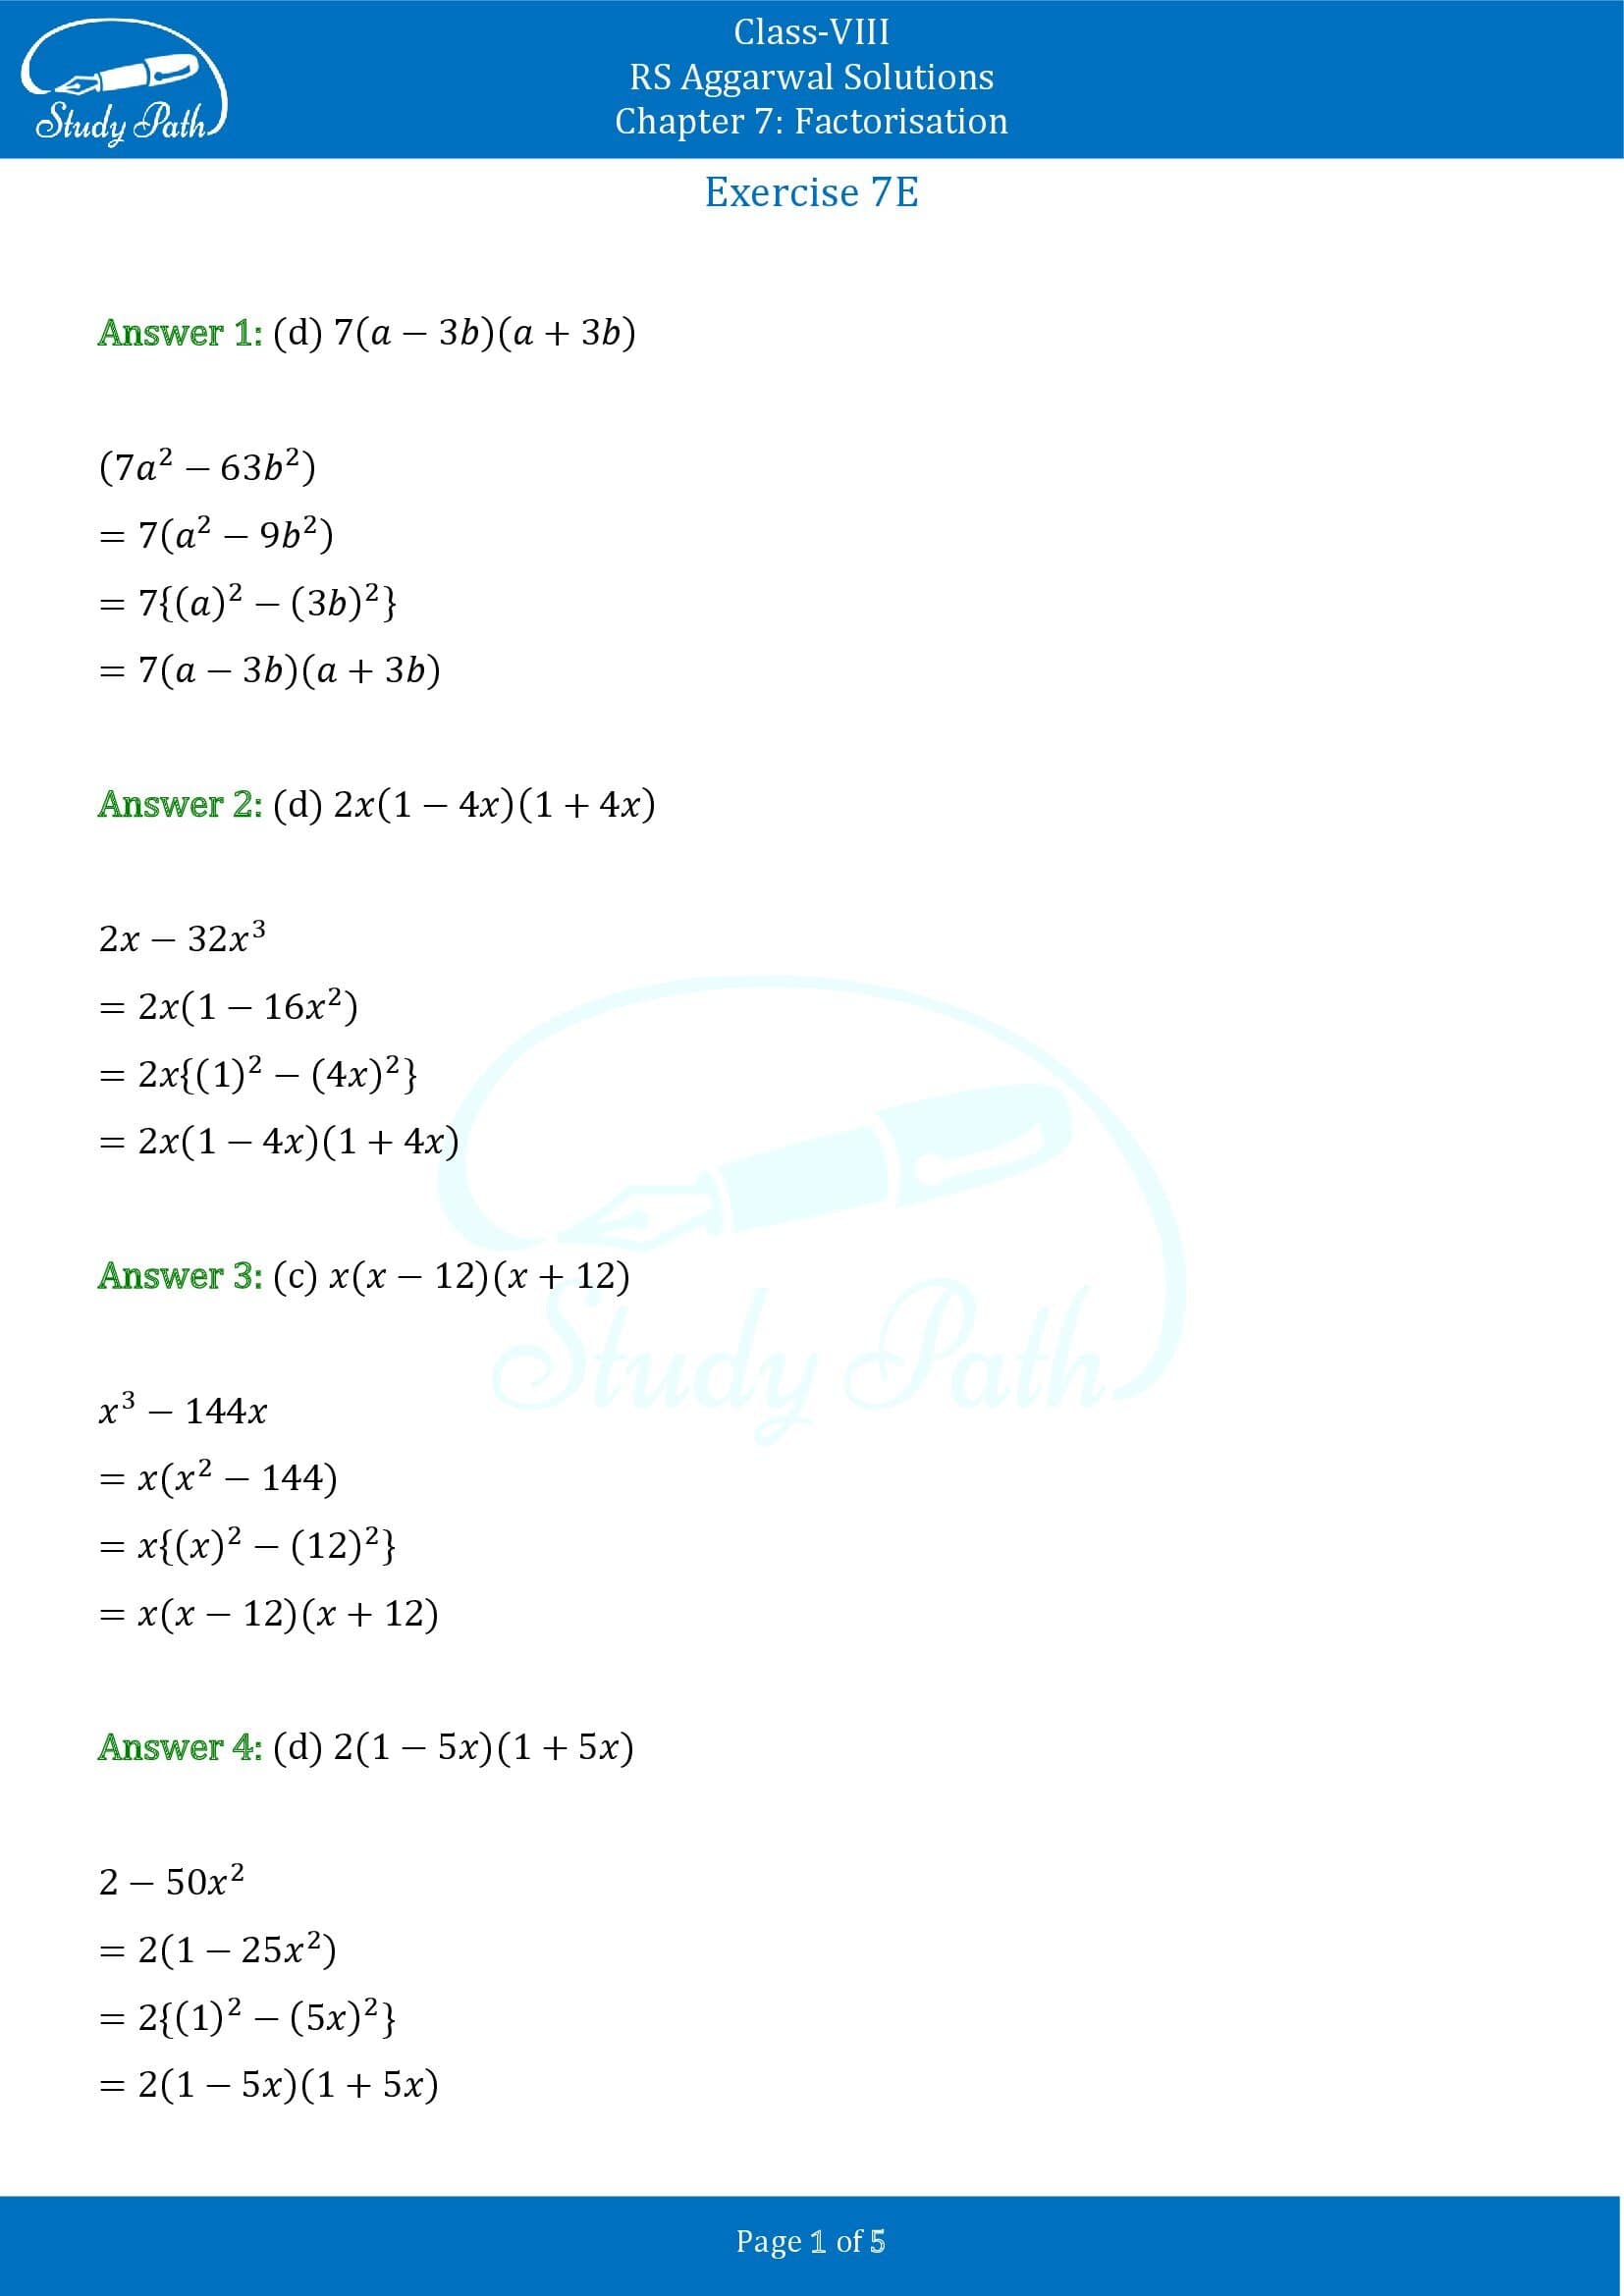 RS Aggarwal Solutions Class 8 Chapter 7 Factorisation Exercise 7E MCQs 00001